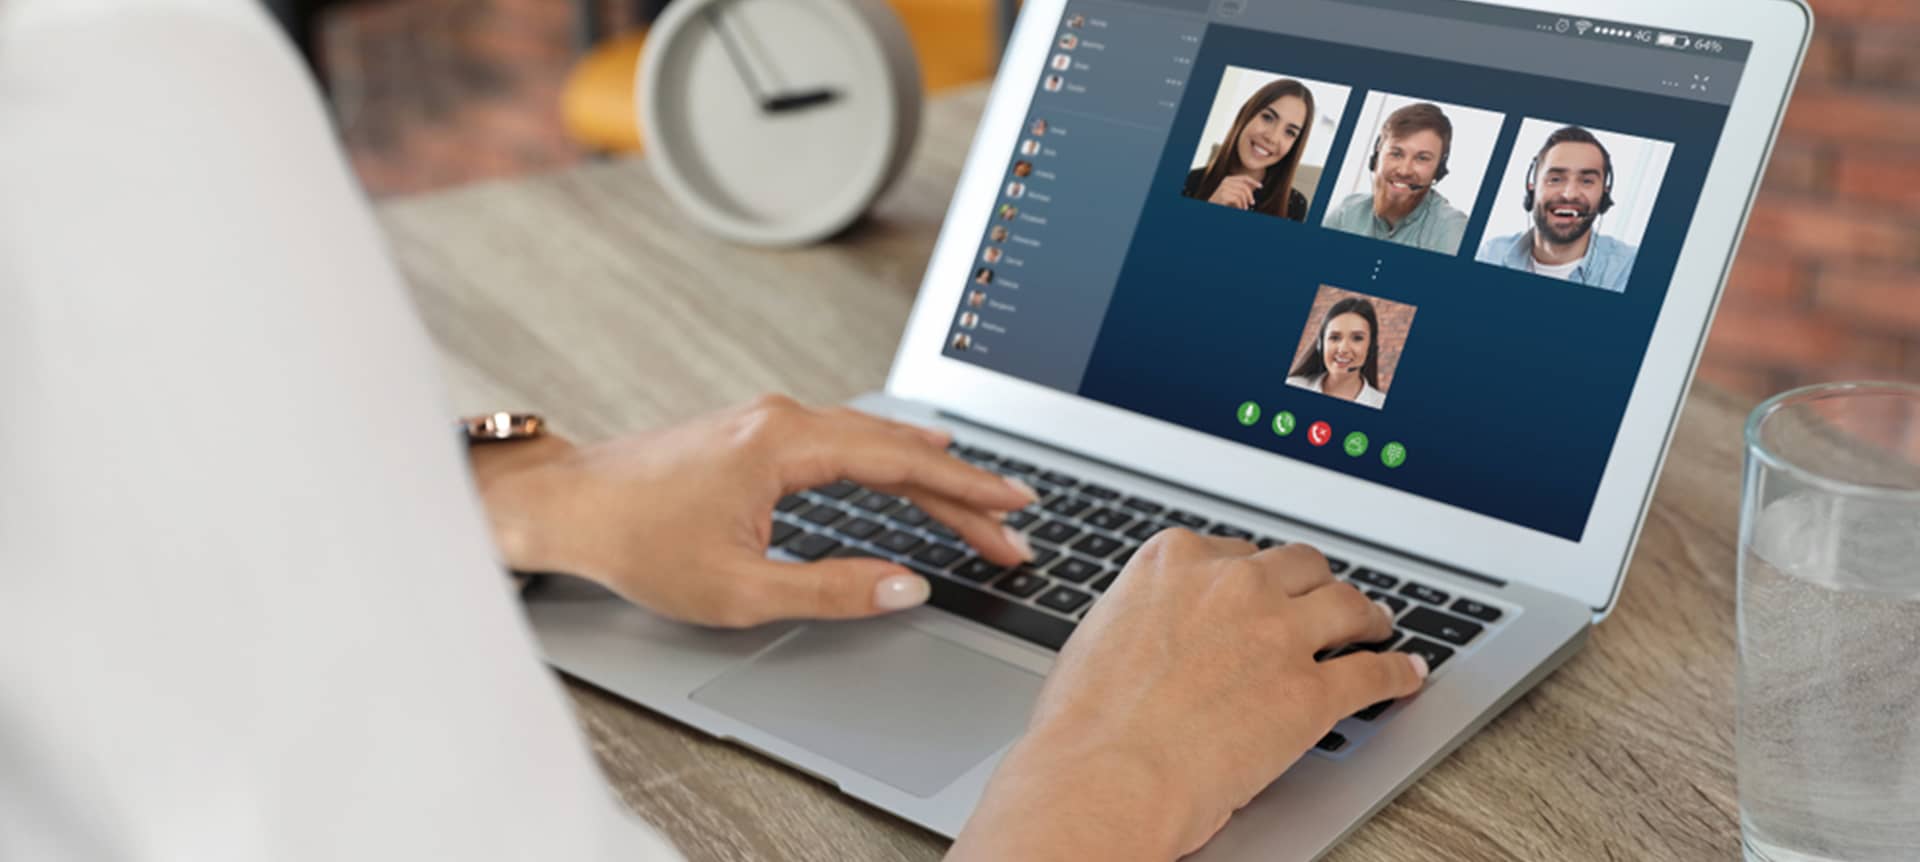 Recruiter using a video interviewing software to onboard candidates